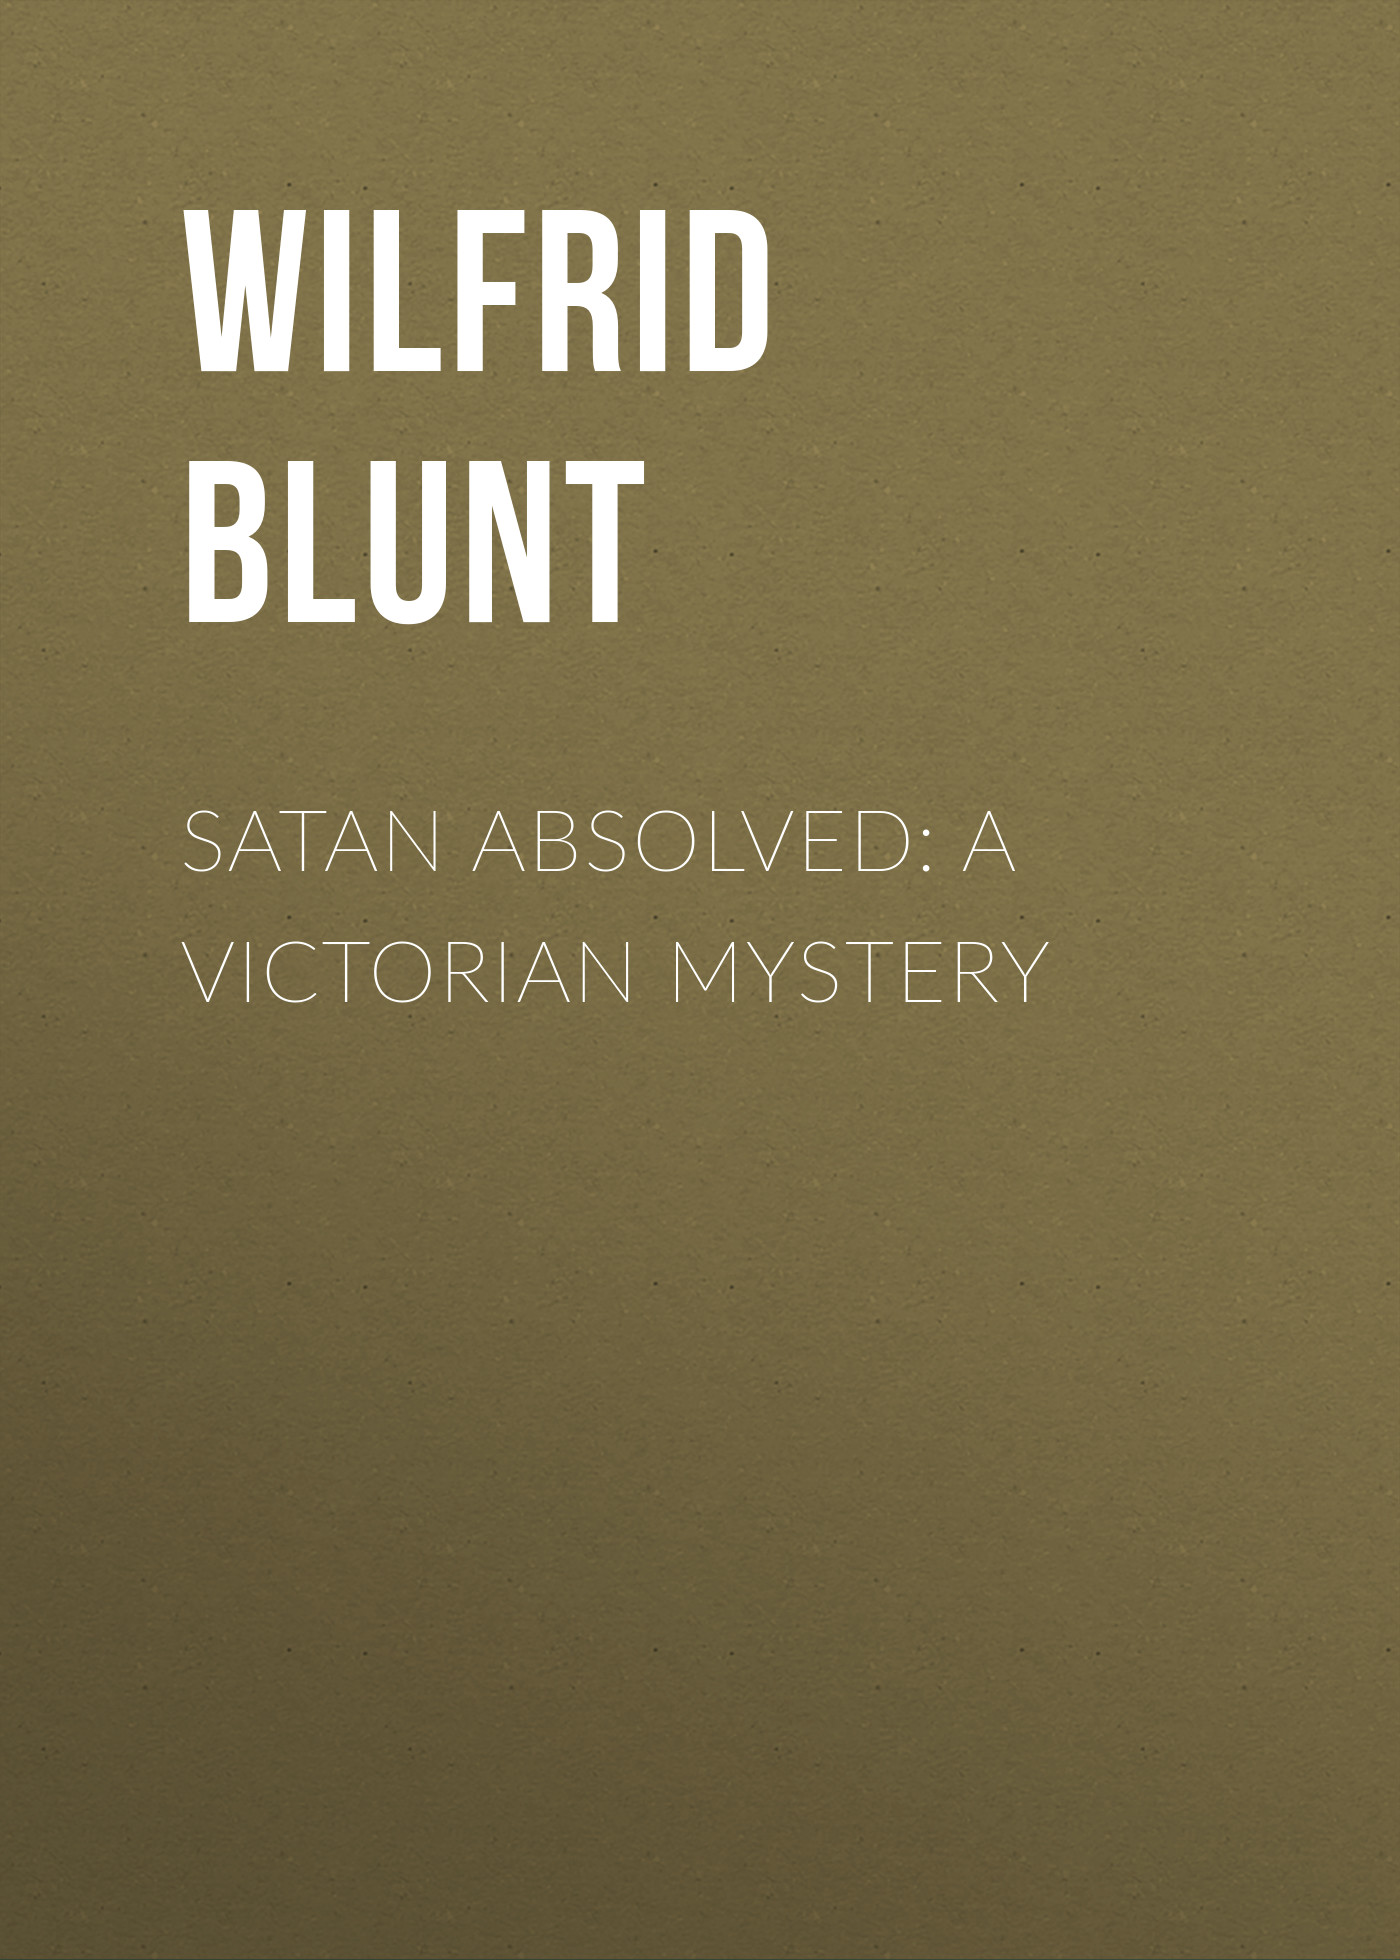 Blunt Wilfrid Scawen Satan Absolved: A Victorian Mystery